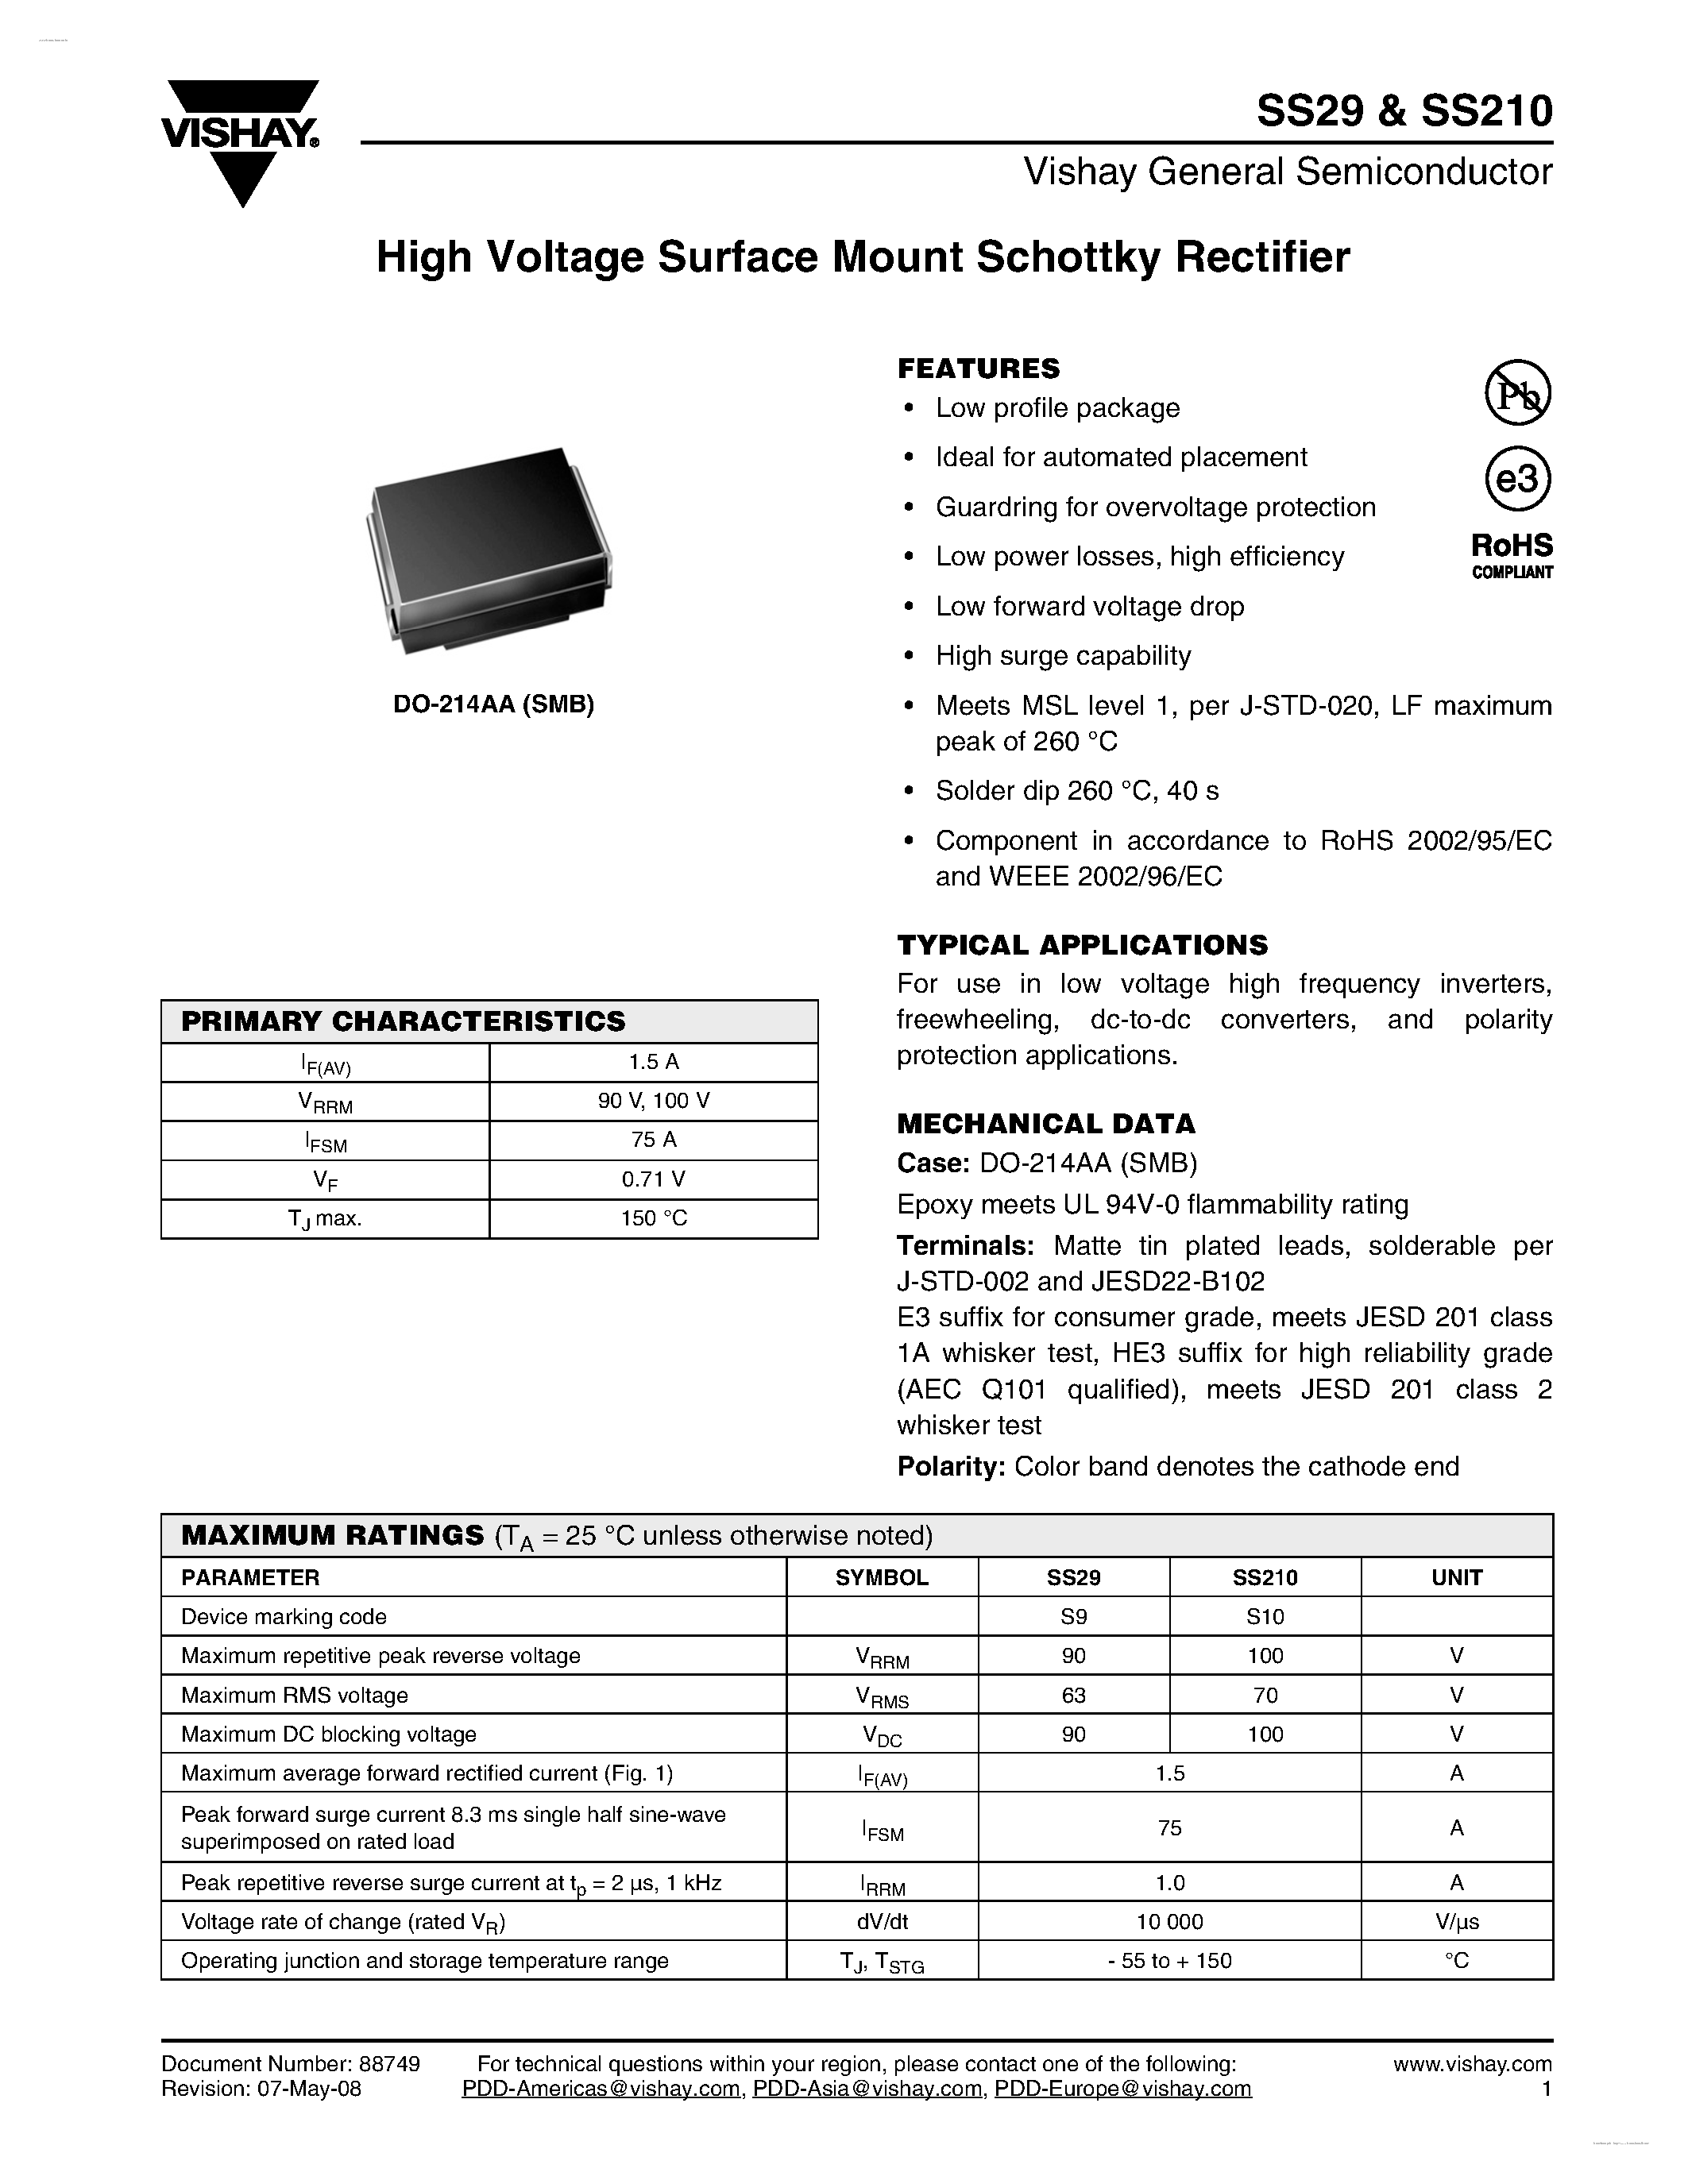 Даташит SS210 - (SS29 / SS210) High Voltage Surface Mount Schottky Rectifier страница 1